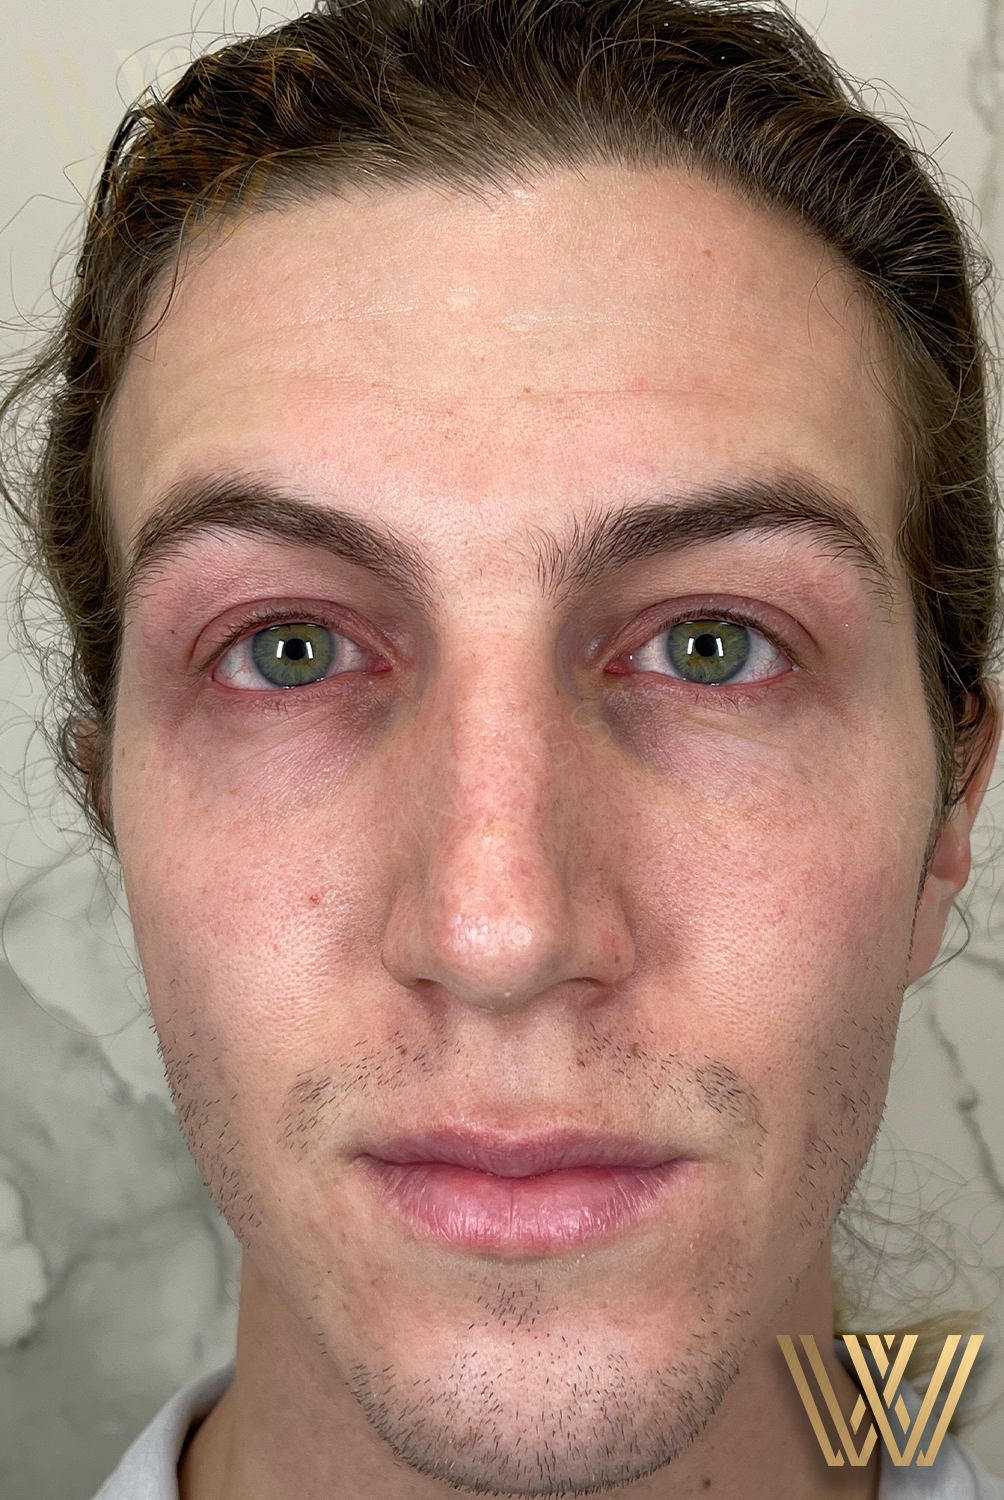 Before photo of a young man prior to receiving transformative Sculptra treatment at Windermere Medical Spa & Laser Institute, leading Sculptra provider in Orlando, FL